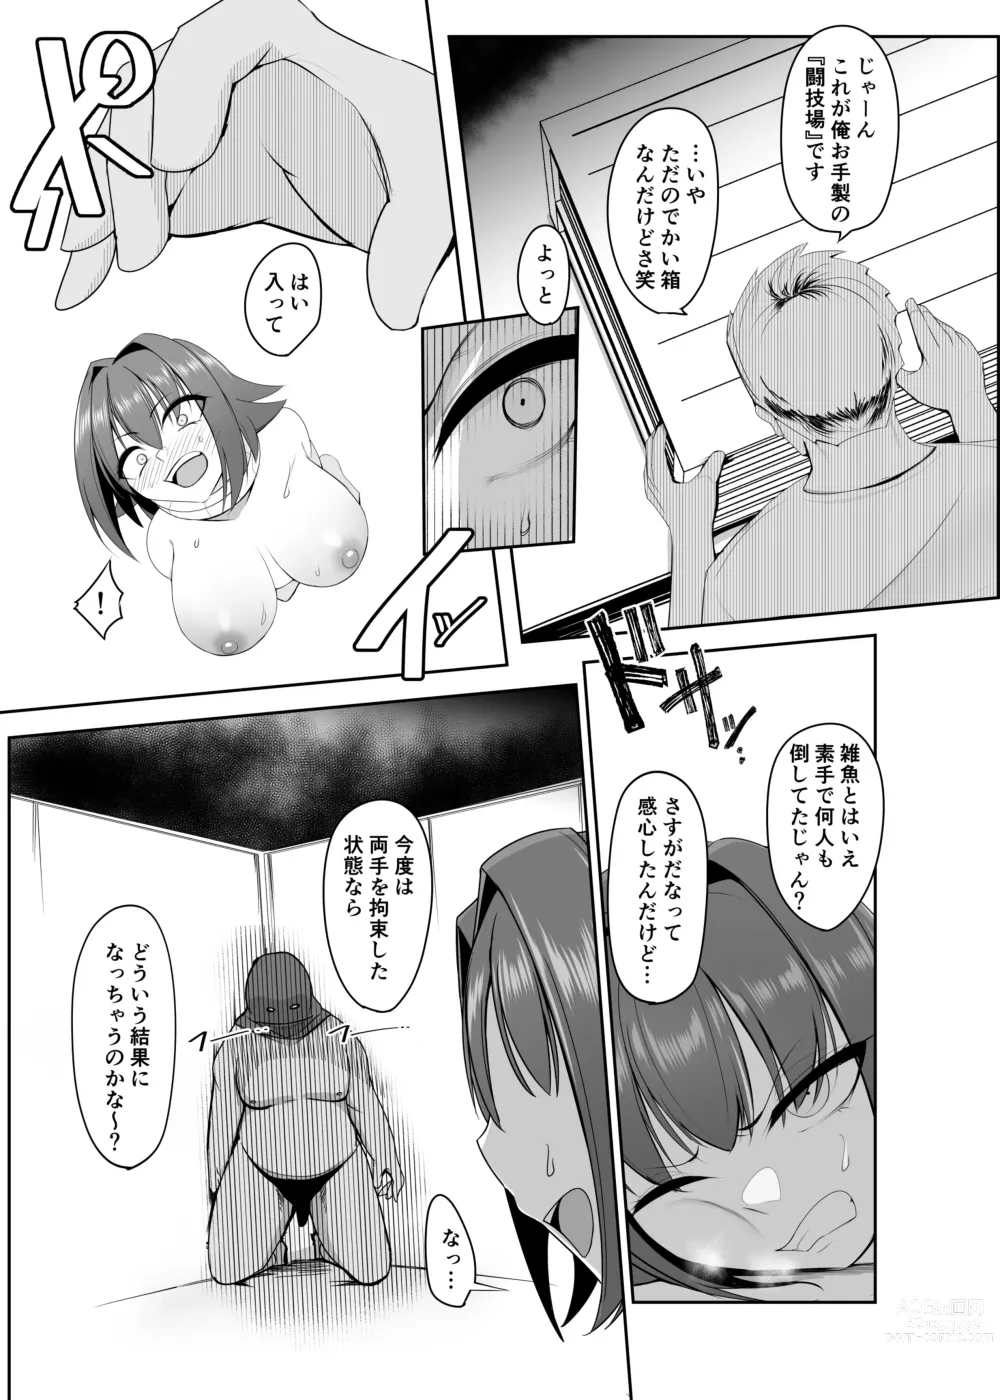 Page 16 of doujinshi Doll Turning Collar - Female Warrior